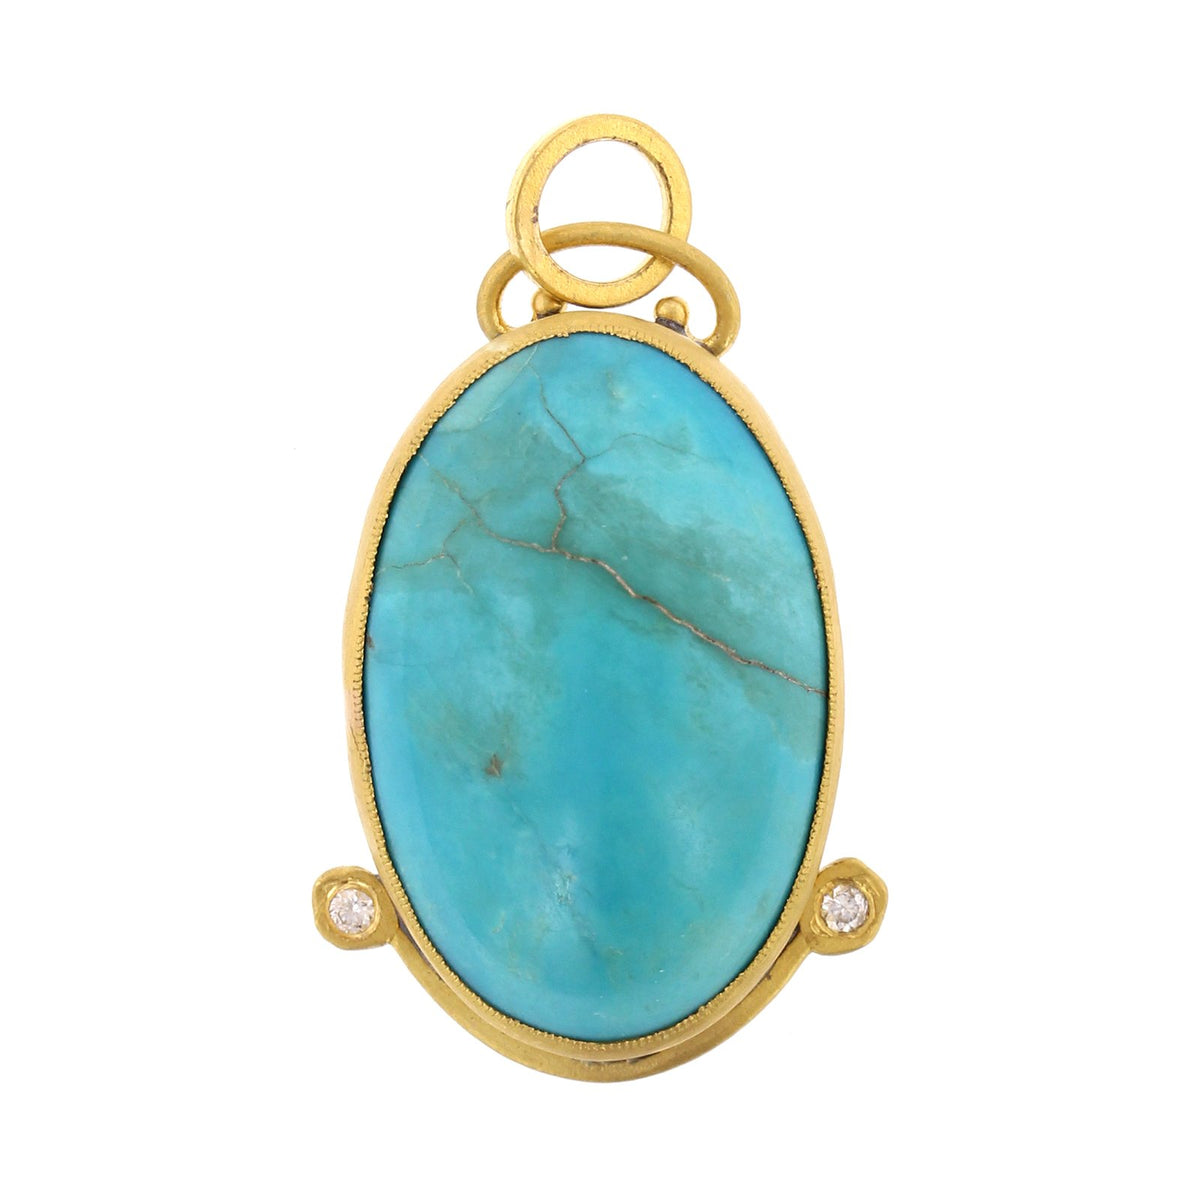 24K Yellow Gold and Sterling Silver Turquoise Charm